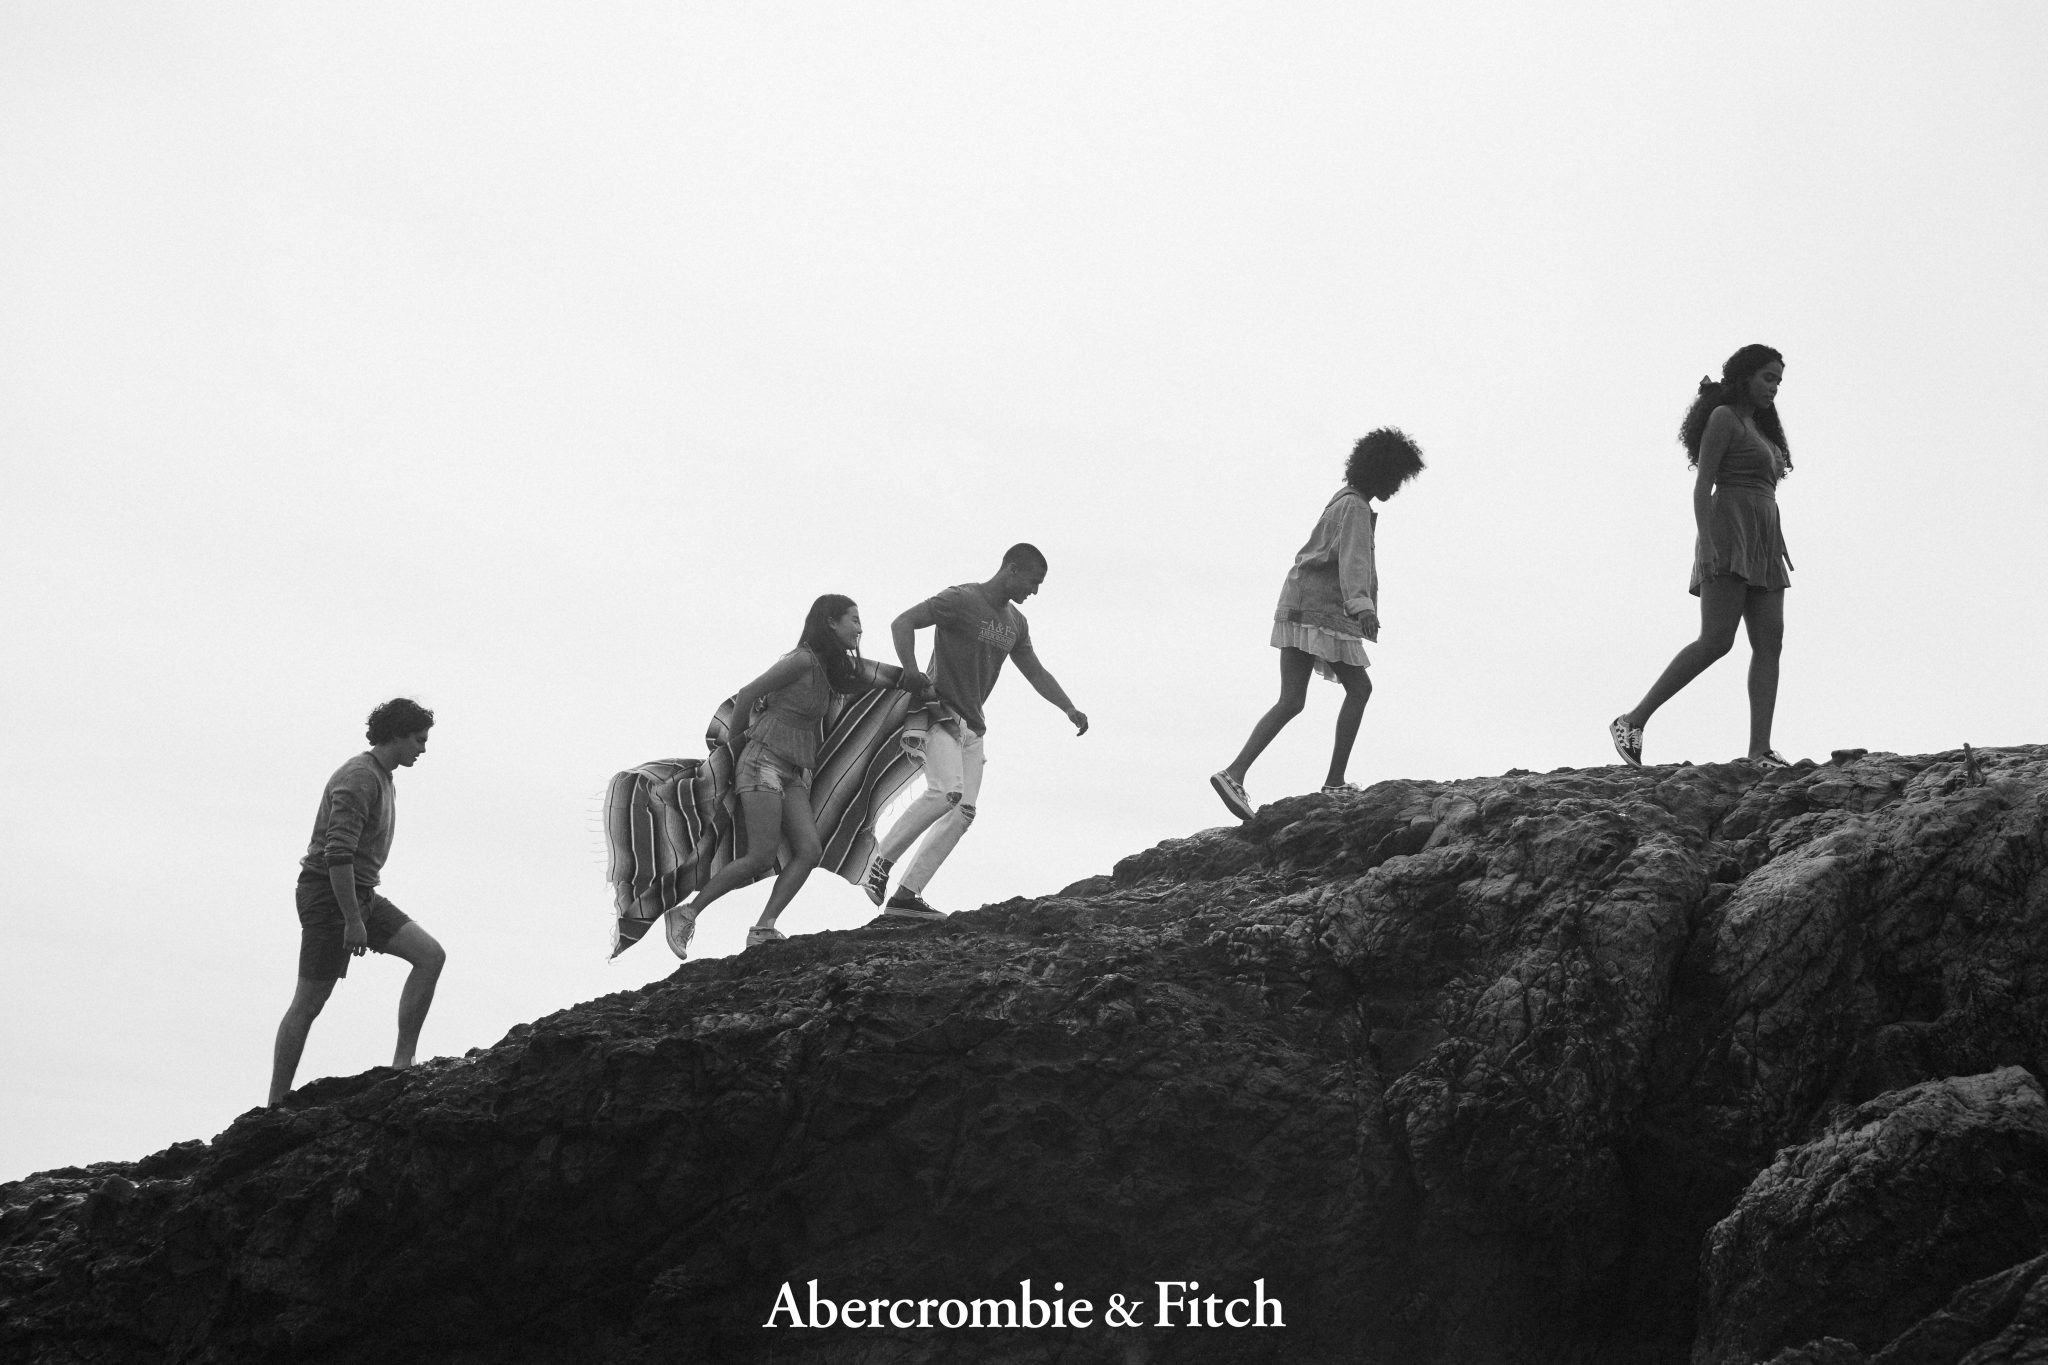  | Abercrombie & Fitch | 11